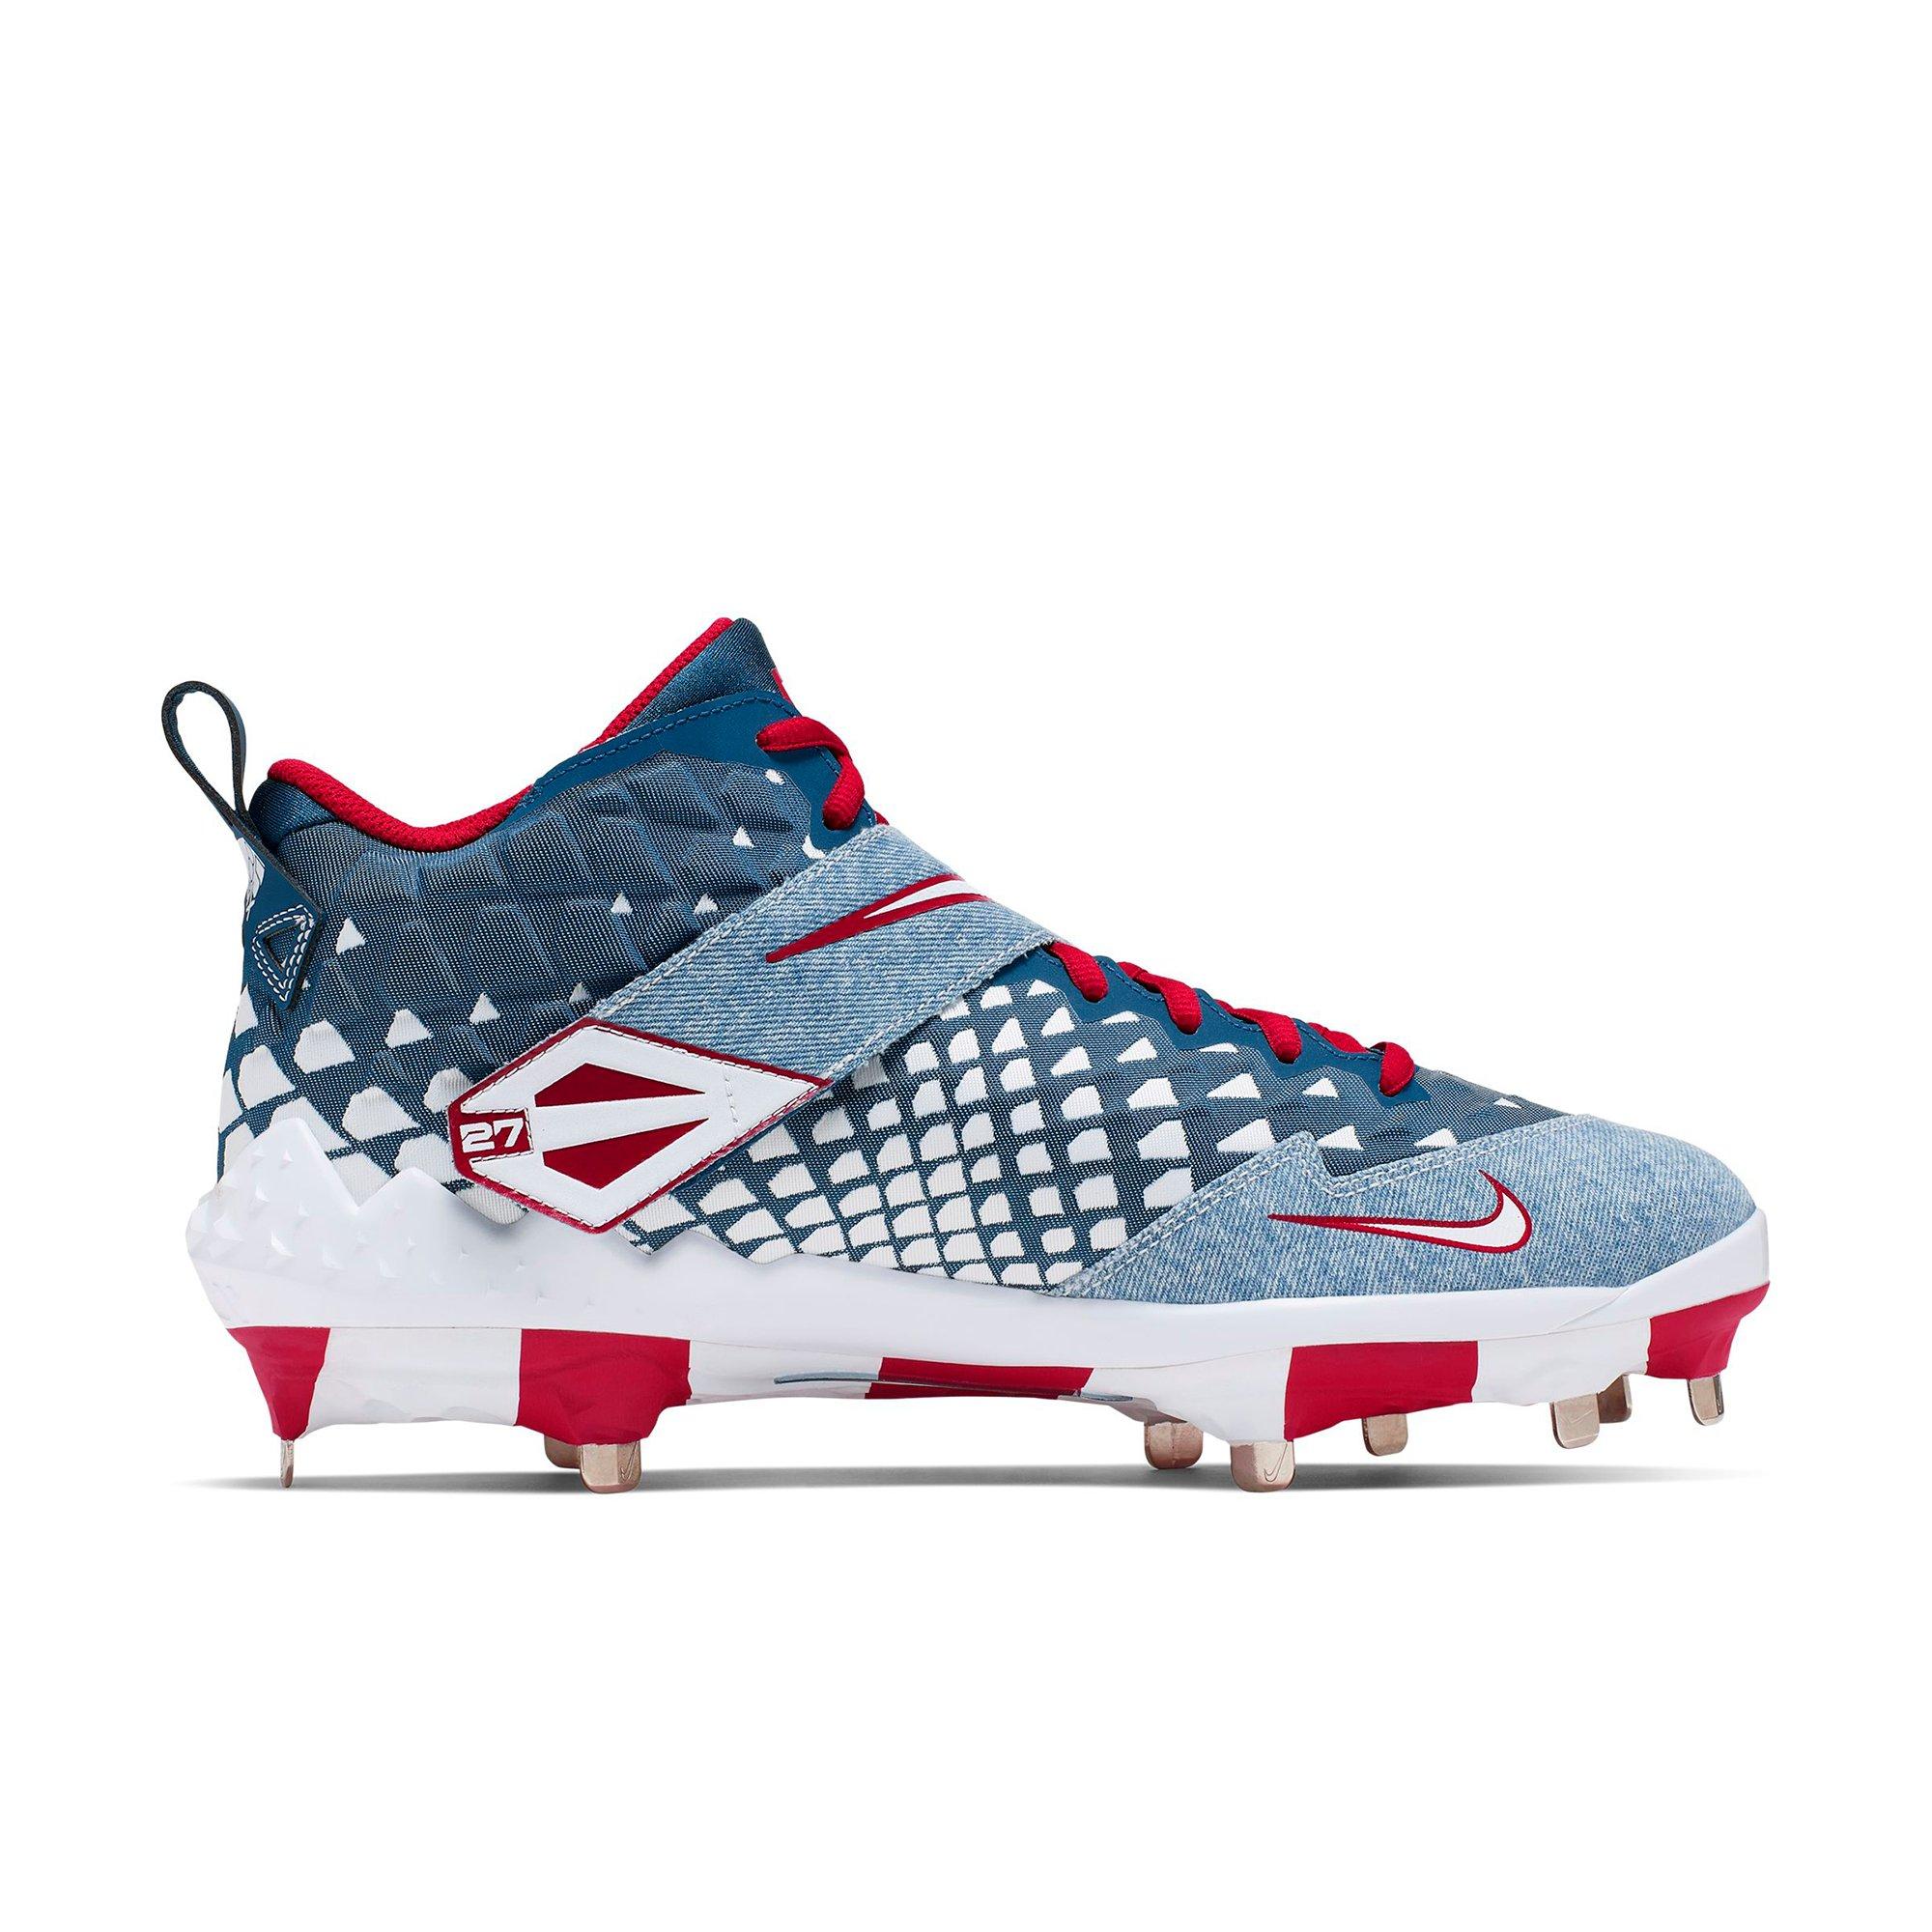 mike trout youth cleats